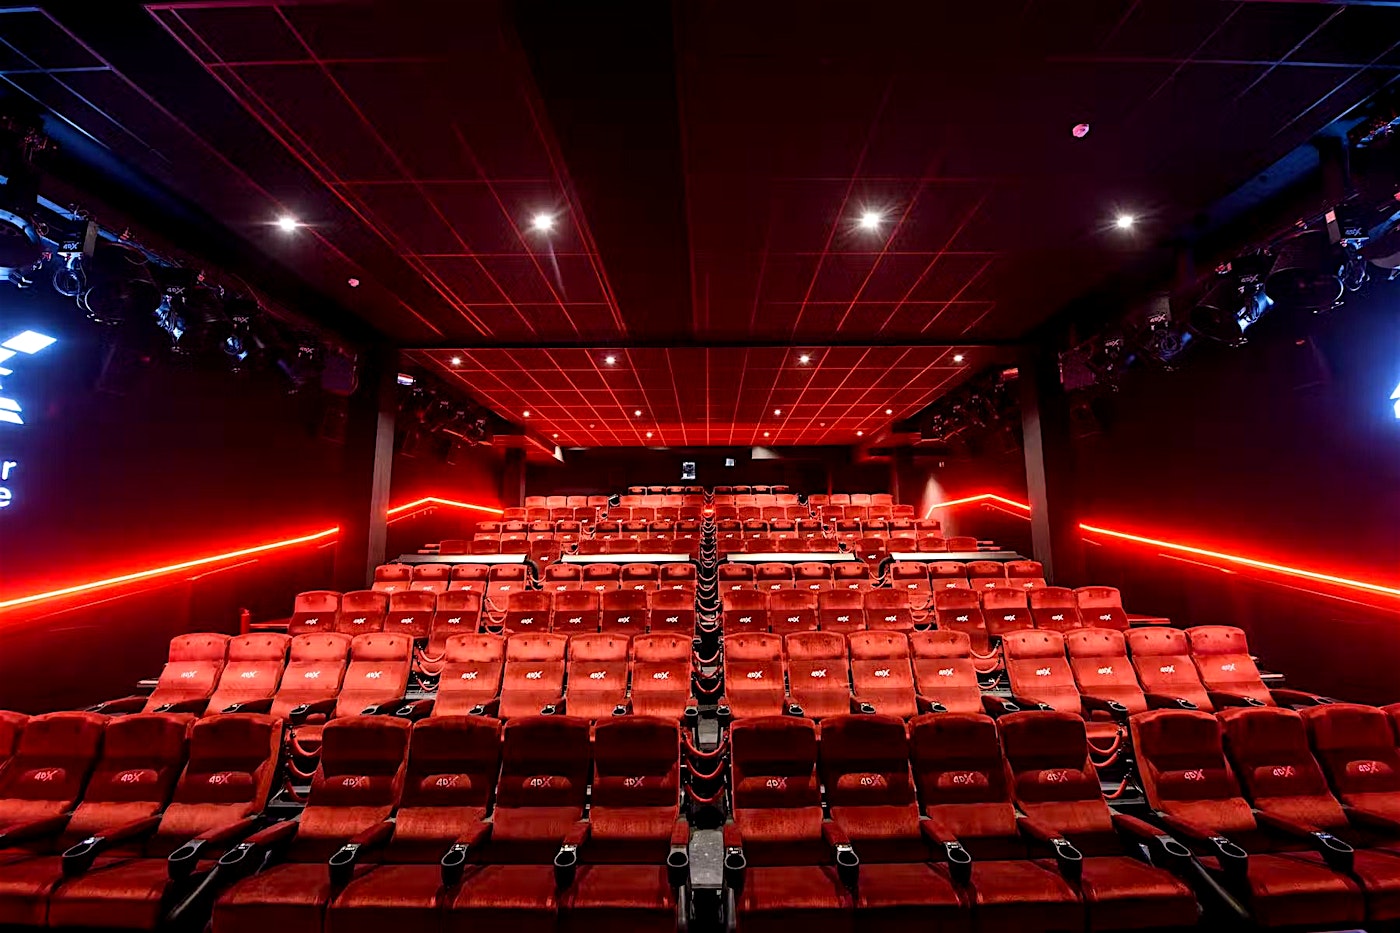 The 4DX screening room in Leicester Square, London, available for hire